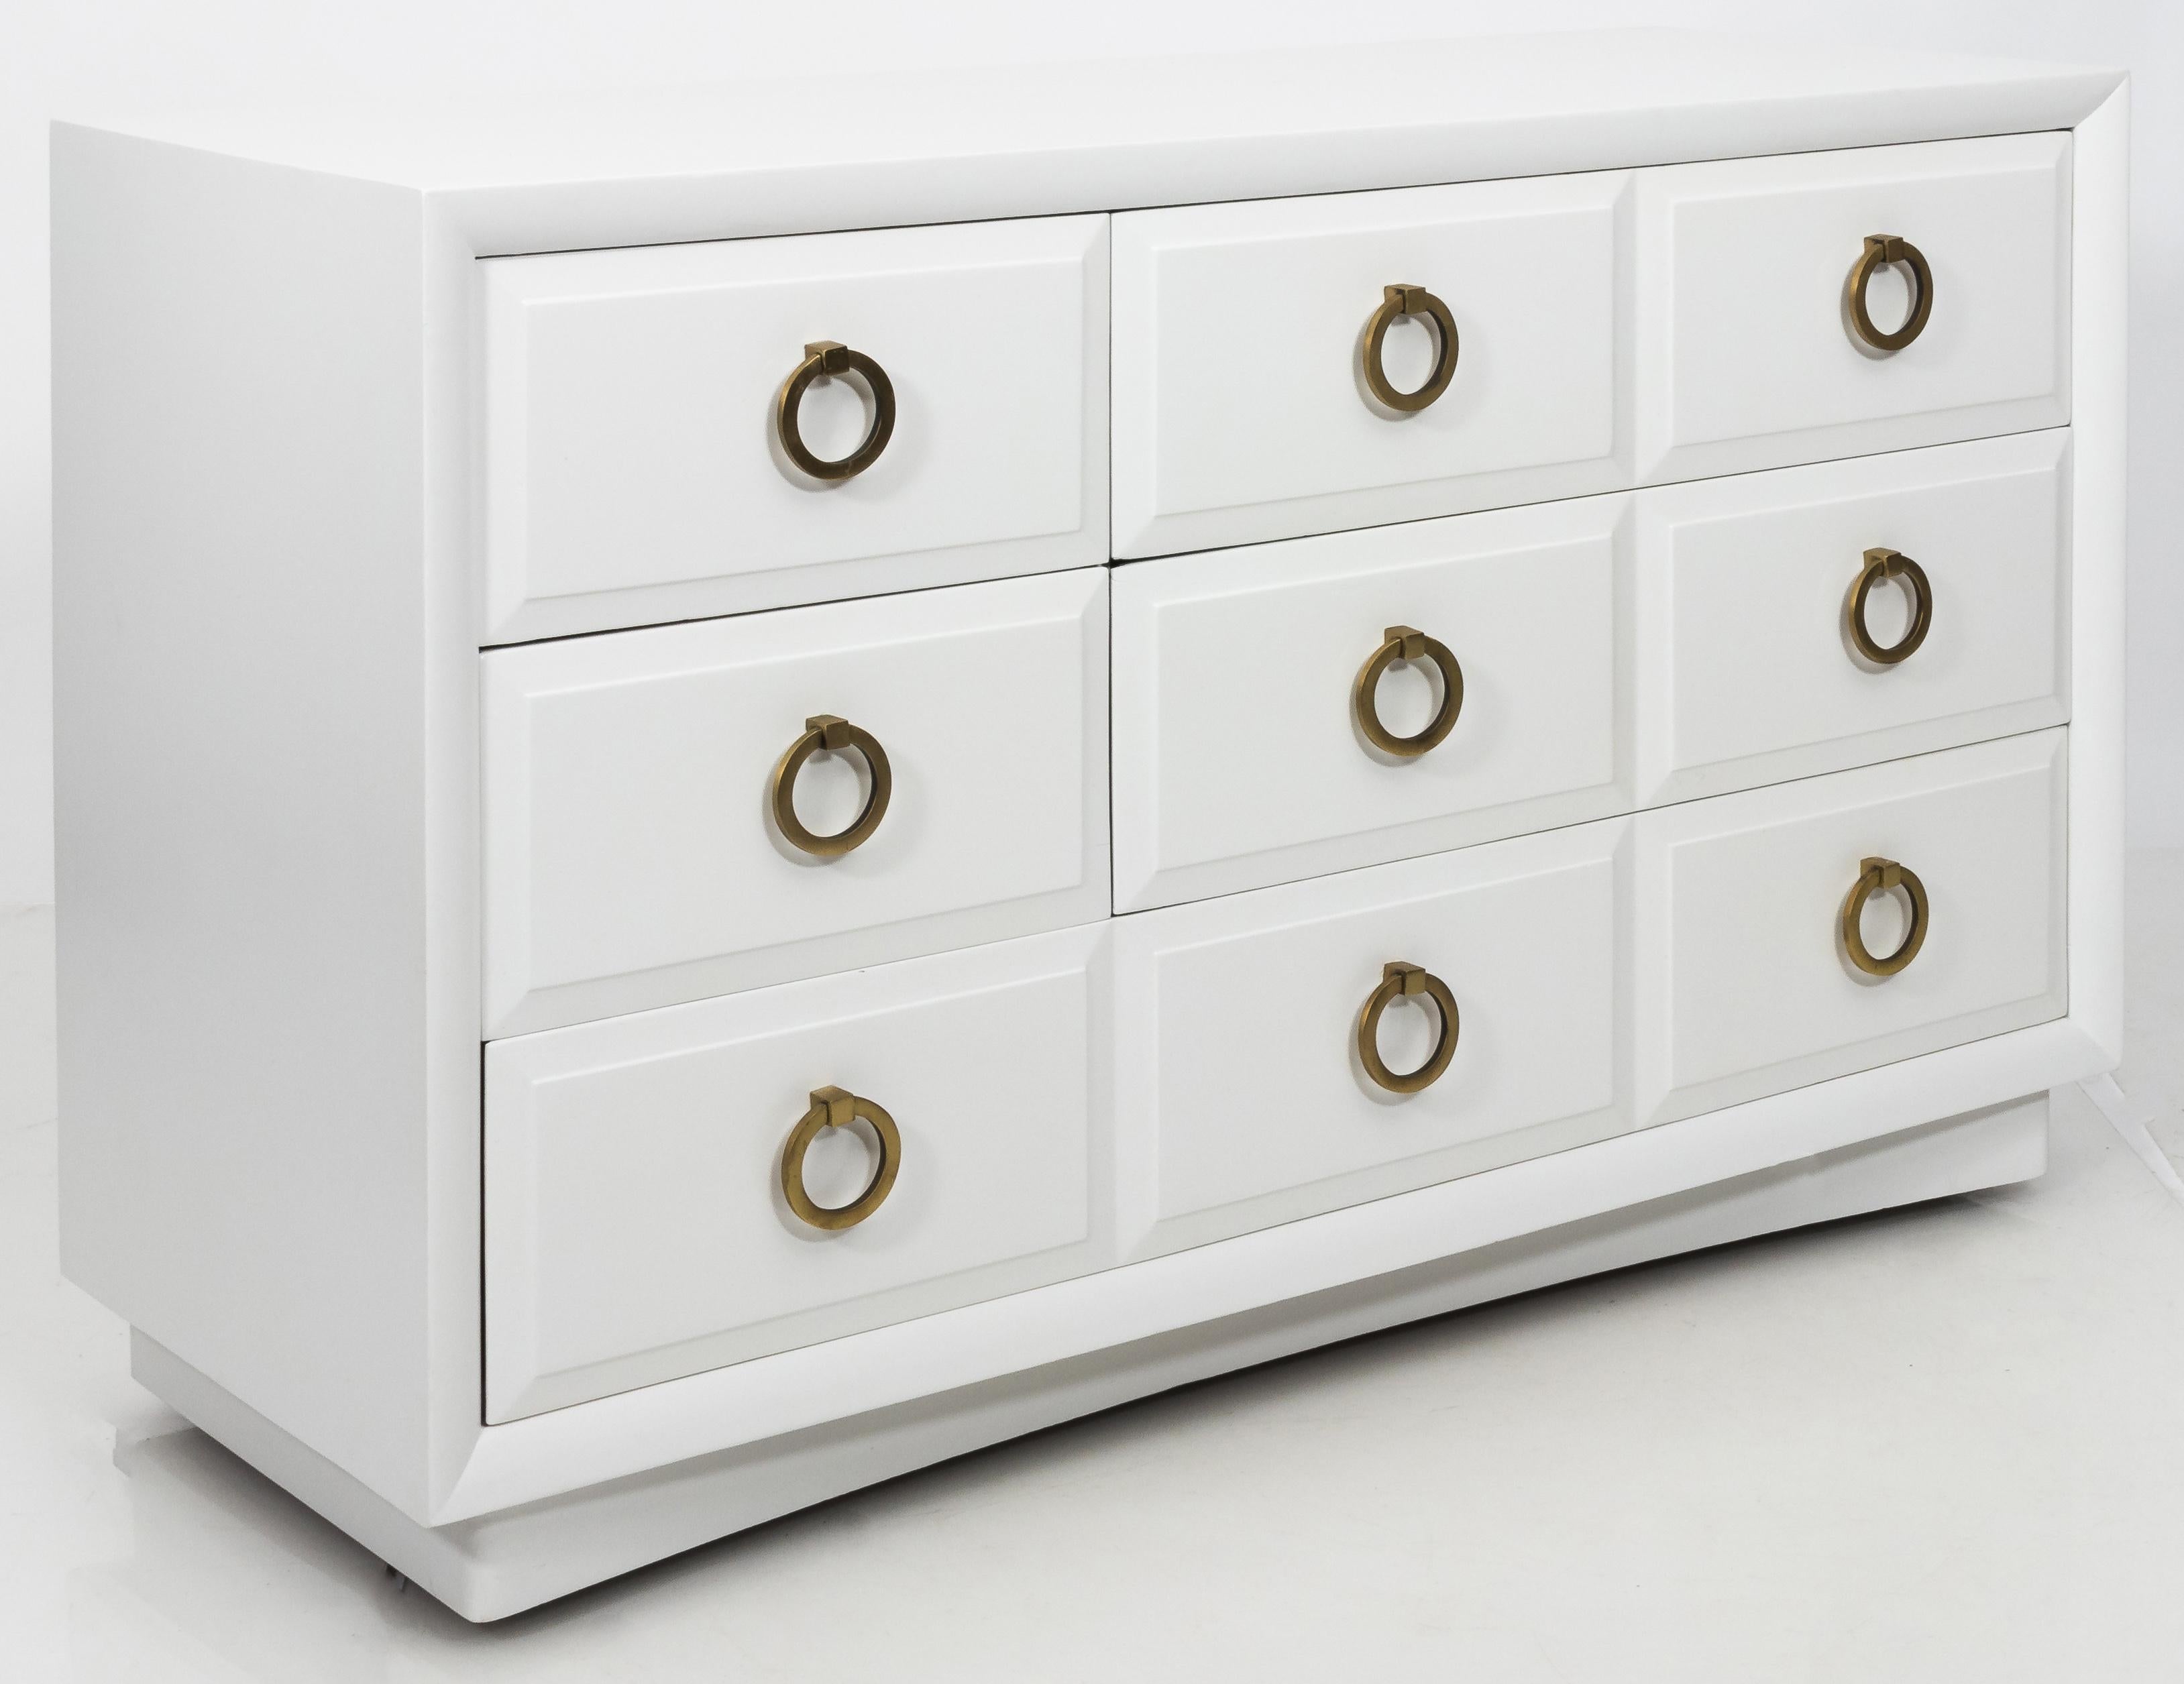 Chest of drawers by T.H. Robsjohn-Gibbings for Widdicomb. Five-drawer style. Dresser is newly refinished in satin white paint with original satin brass ring pulls. Stamped Widdicomb inside top drawer. Top left drawer has removable divided storage.